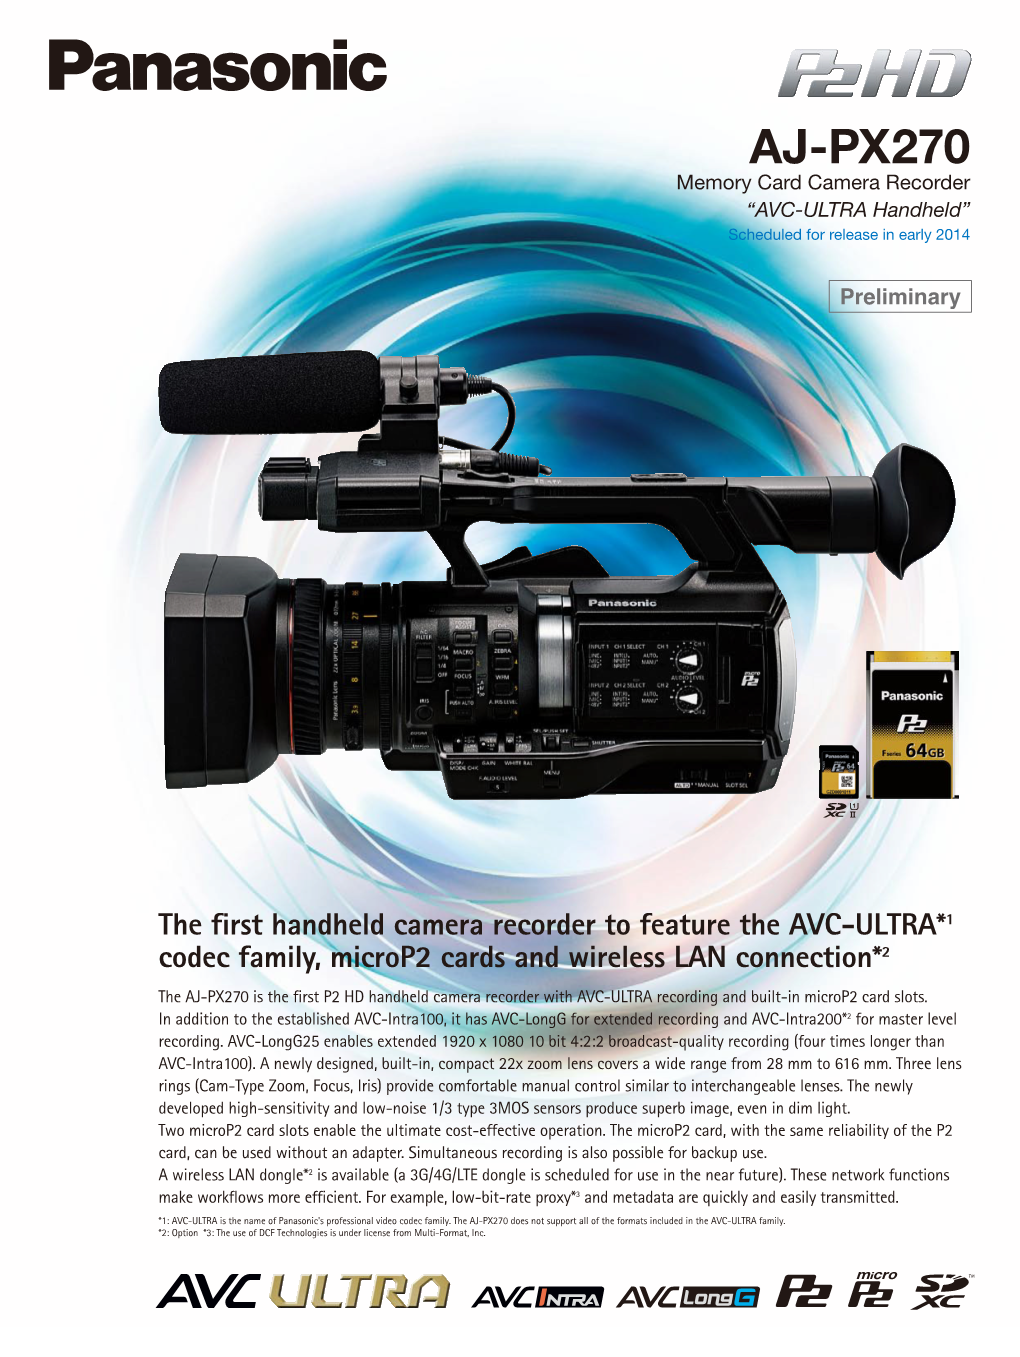 AJ-PX270 Memory Card Camera Recorder “AVC-ULTRA Handheld” Scheduled for Release in Early 2014